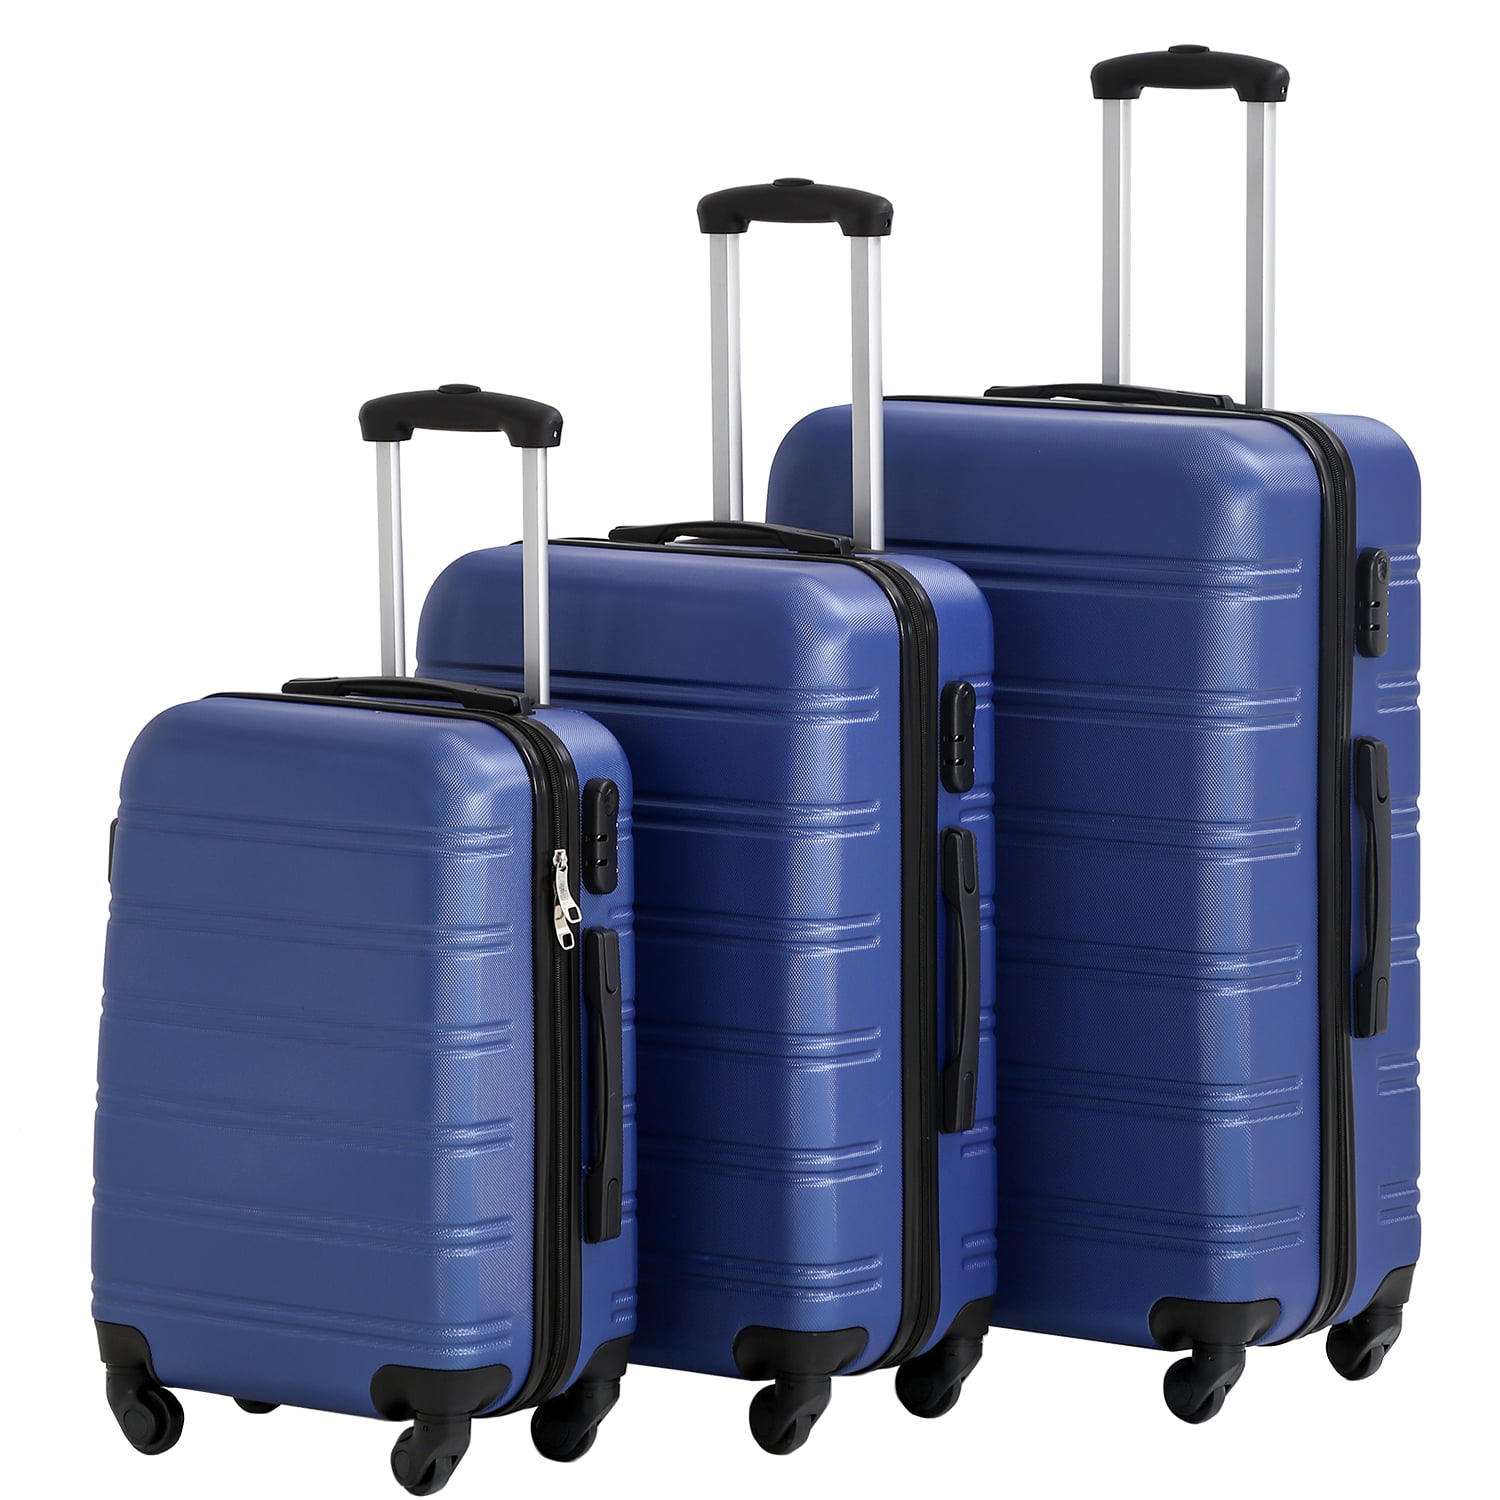 Hard Shell Luggage Sets with Spinner Wheels 3 Piece Suitcase Luggage ...